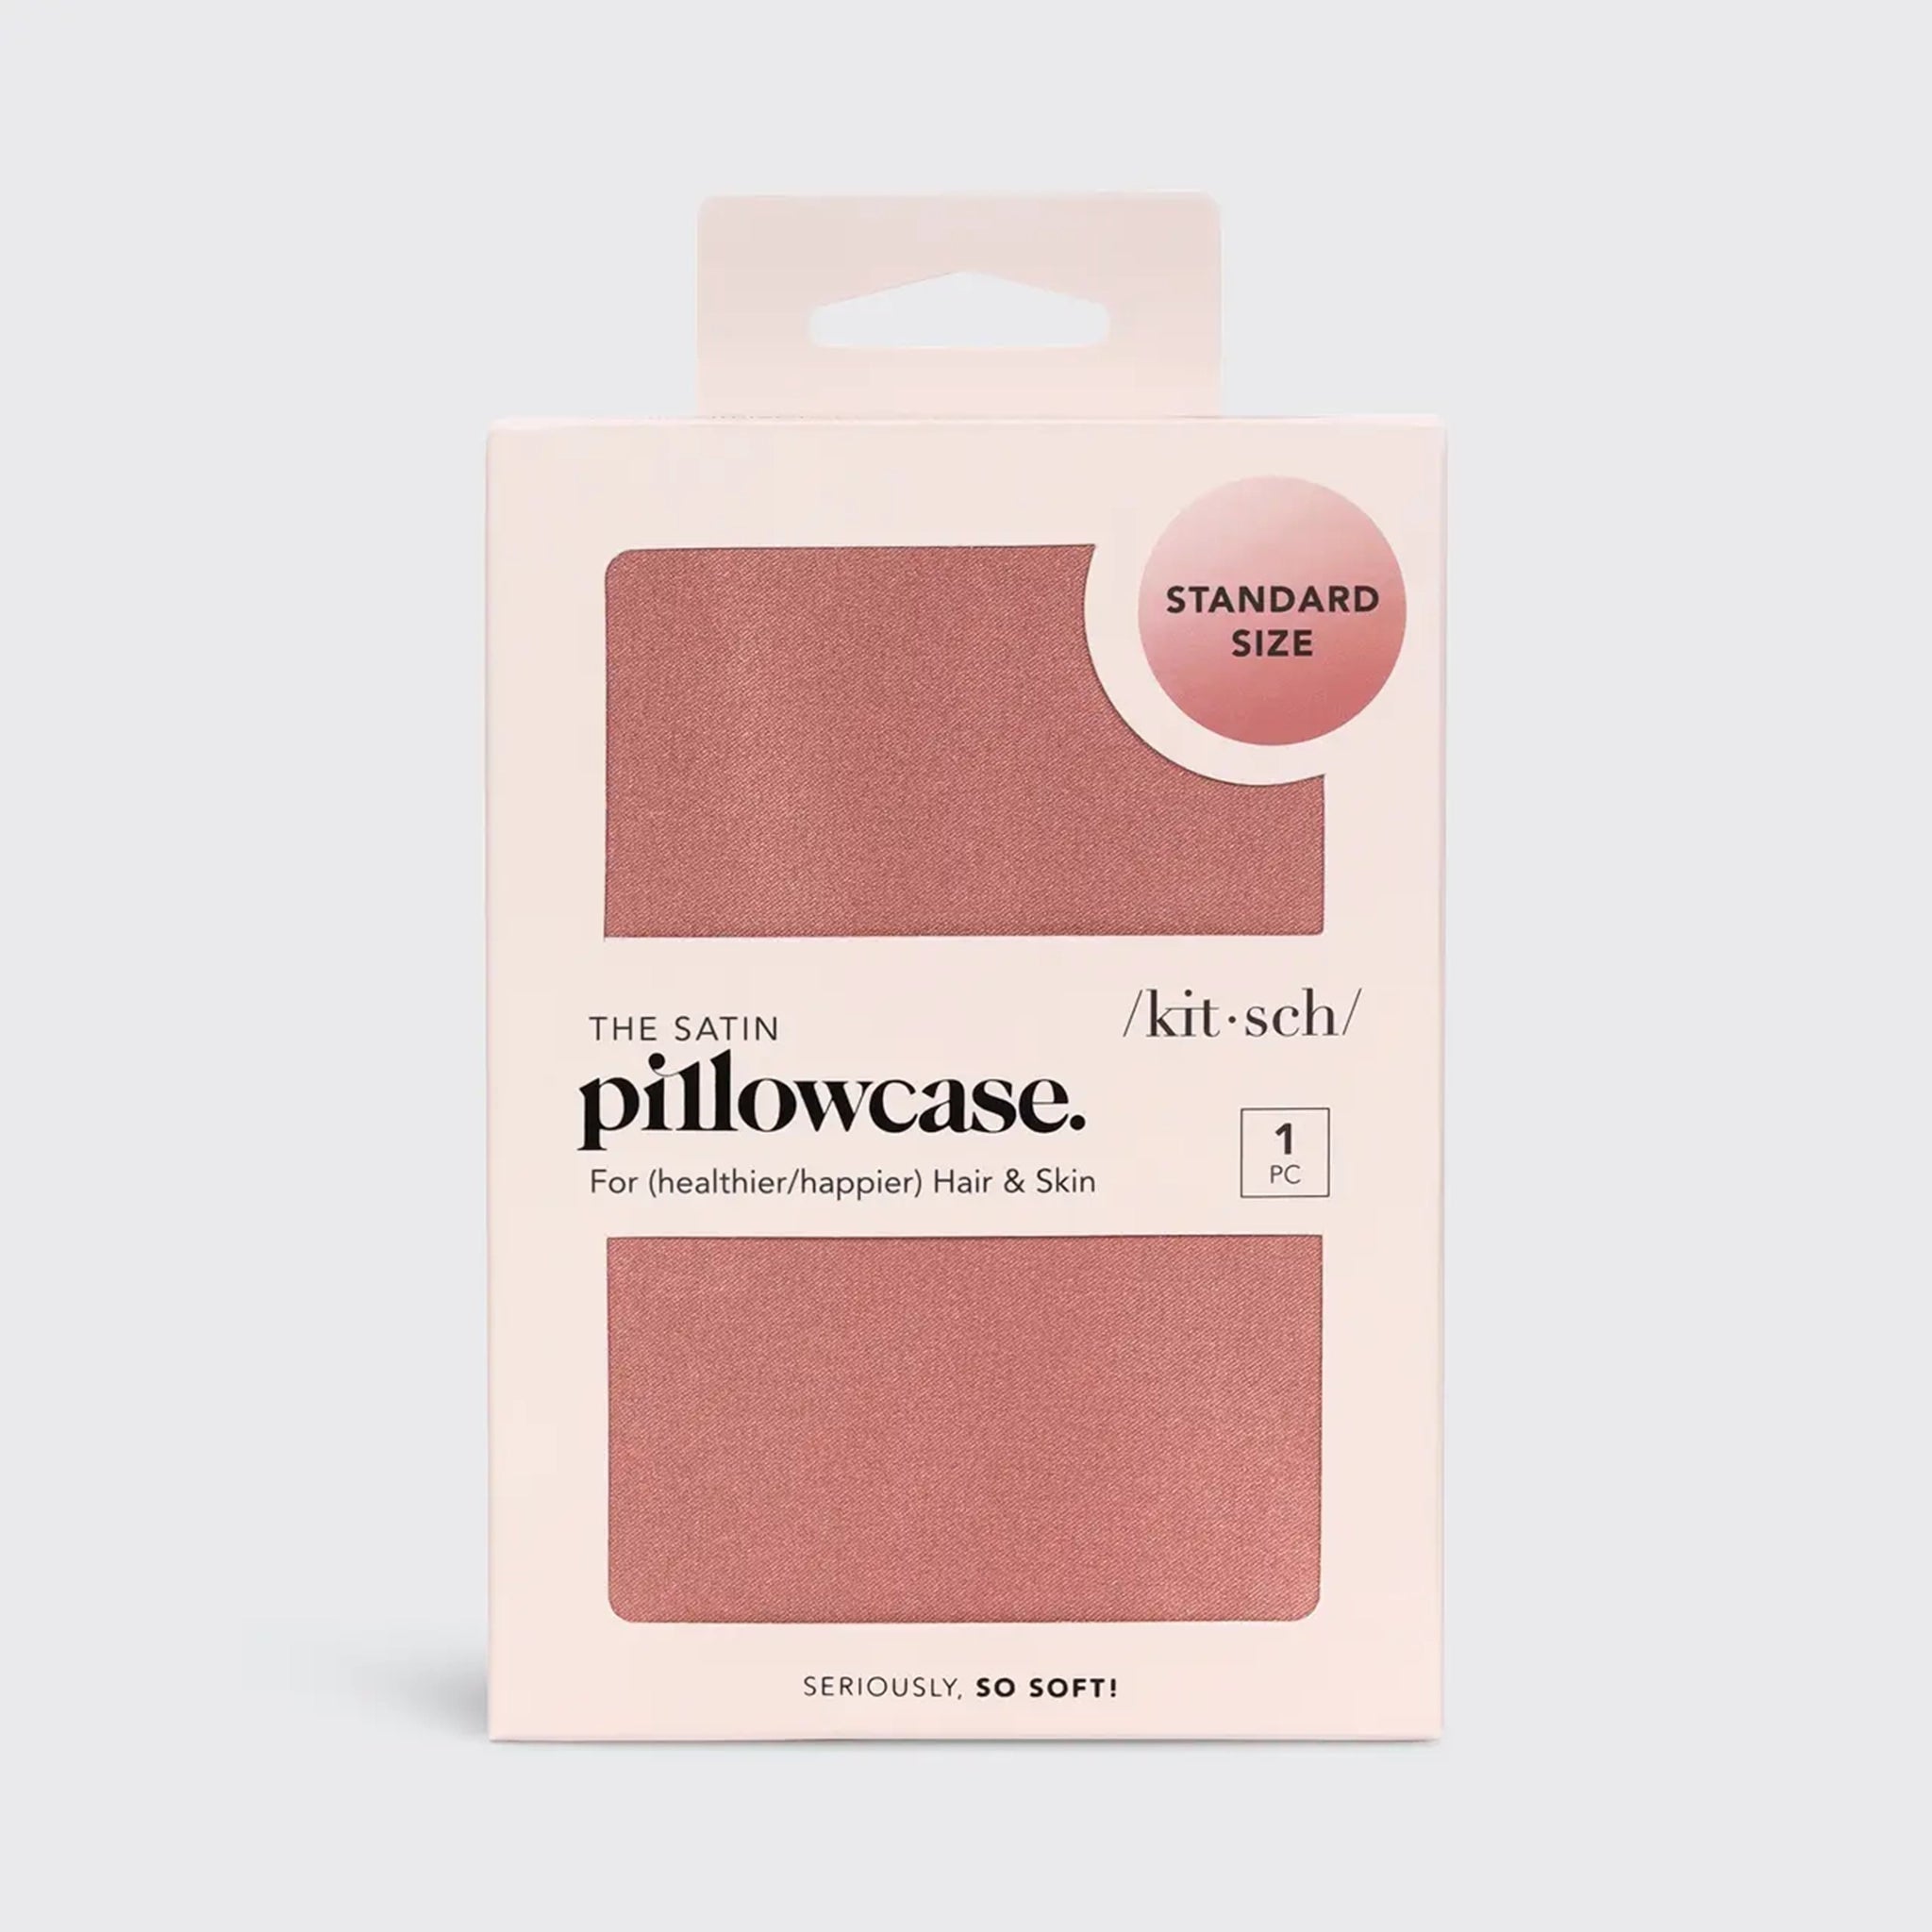 A rose pink/ terracotta satin pillow case folded up in its pink packaging  along with text that reads, &quot;Standard Size&quot; &quot;The Satin Pillowcase For (healthier/happier) Hair &amp; Skin&quot; &quot;1 PC&quot;.